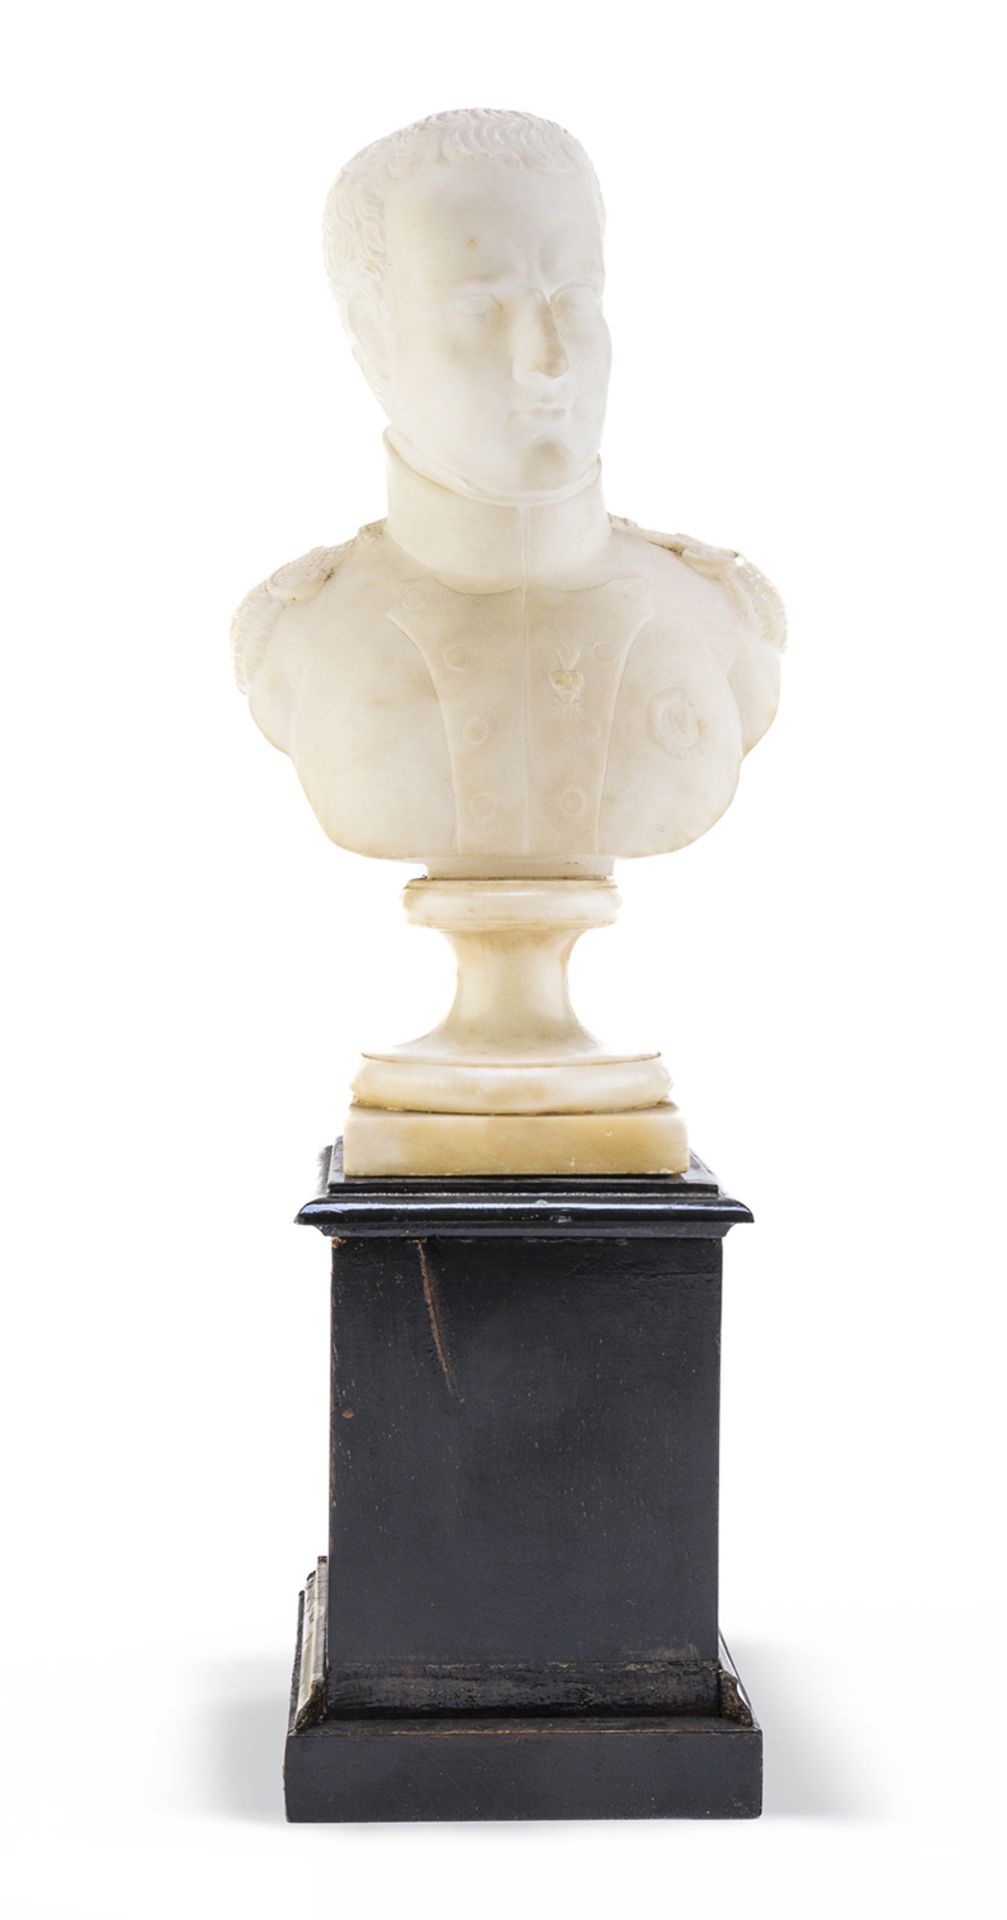 SMALL ALABASTER BUST OF NAPOLEON 19th CENTURY